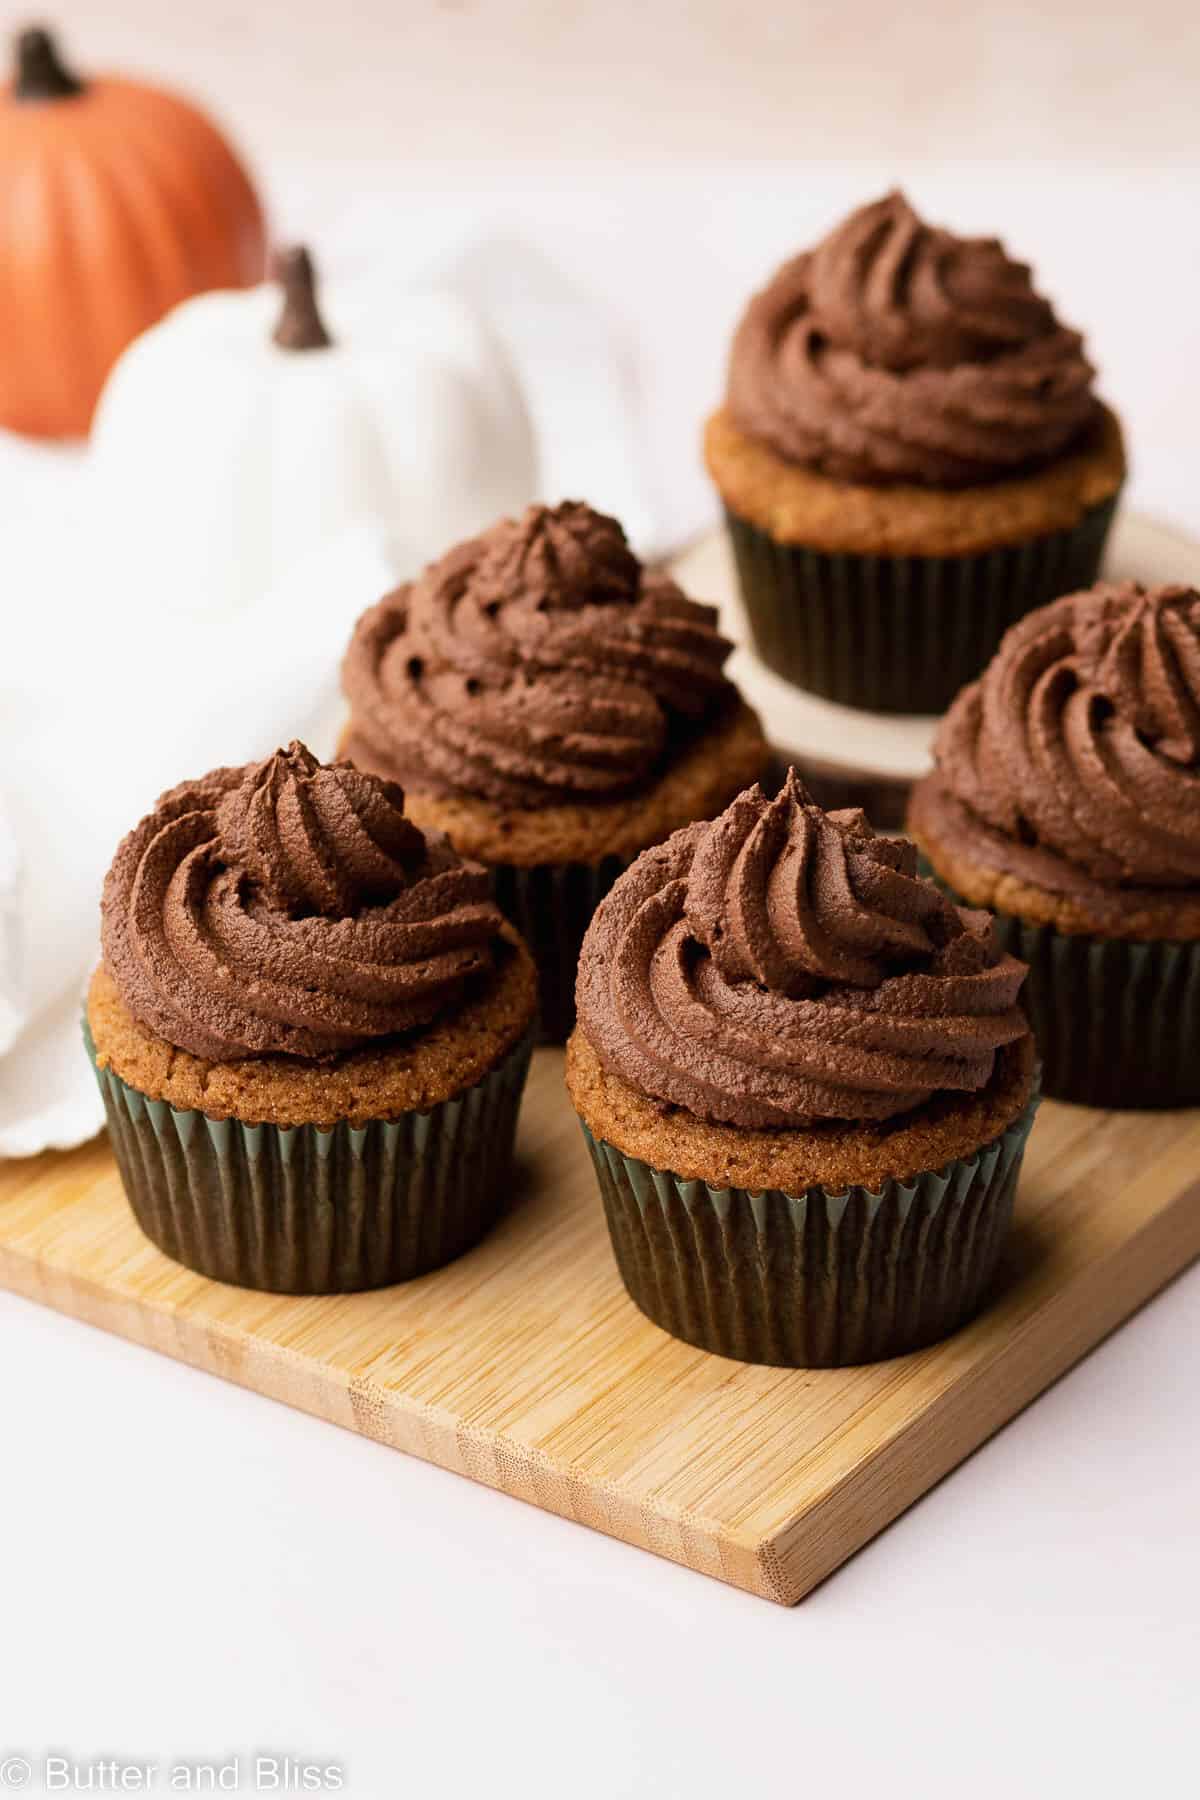 Whipped chocolate ganache frosting on pumpkin cupcakes set on a wood tray.